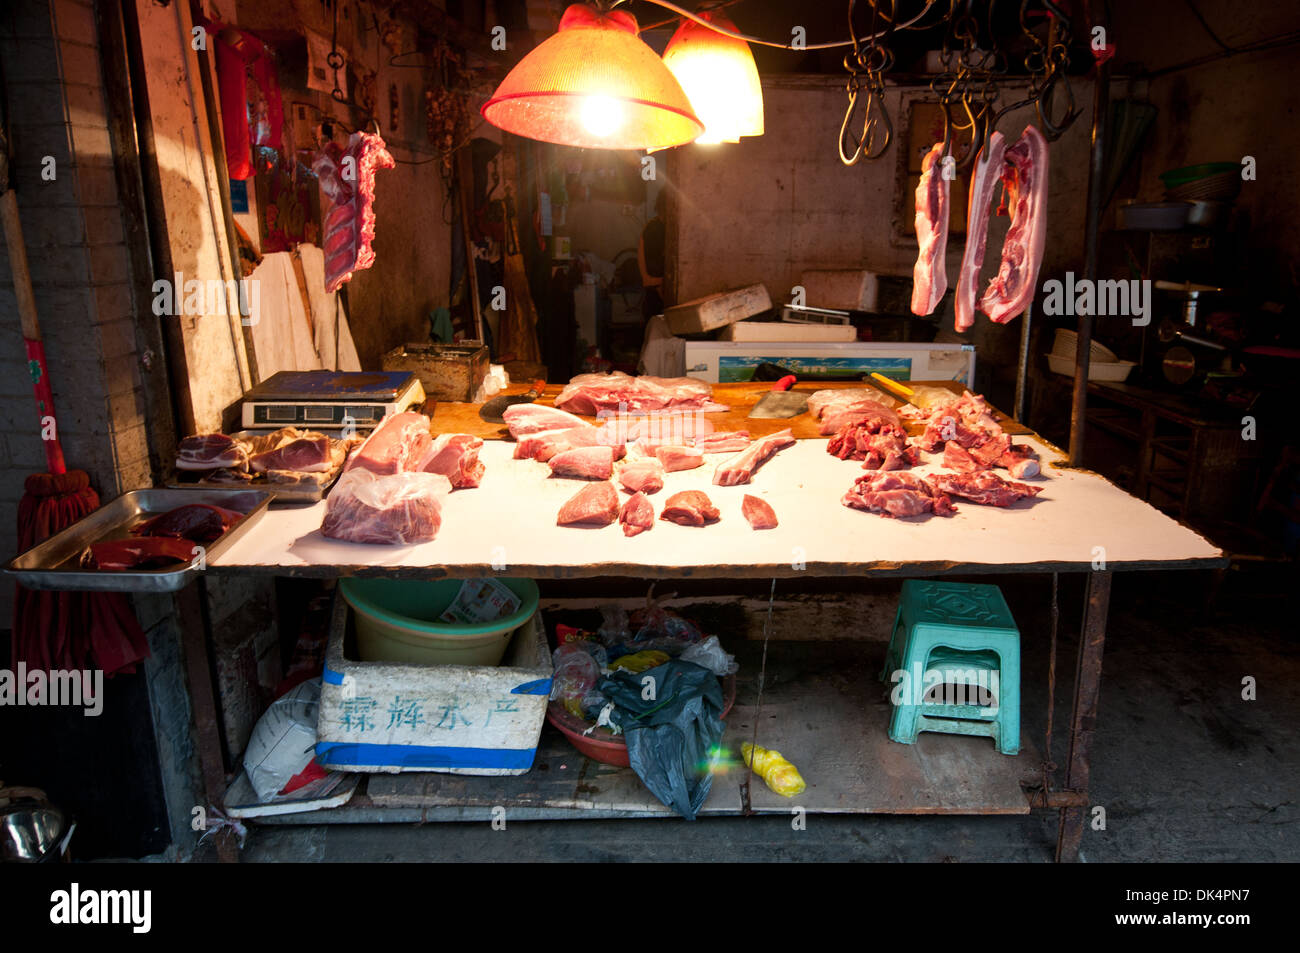 A Chinese butcher prepares meat in his shop in a village in China